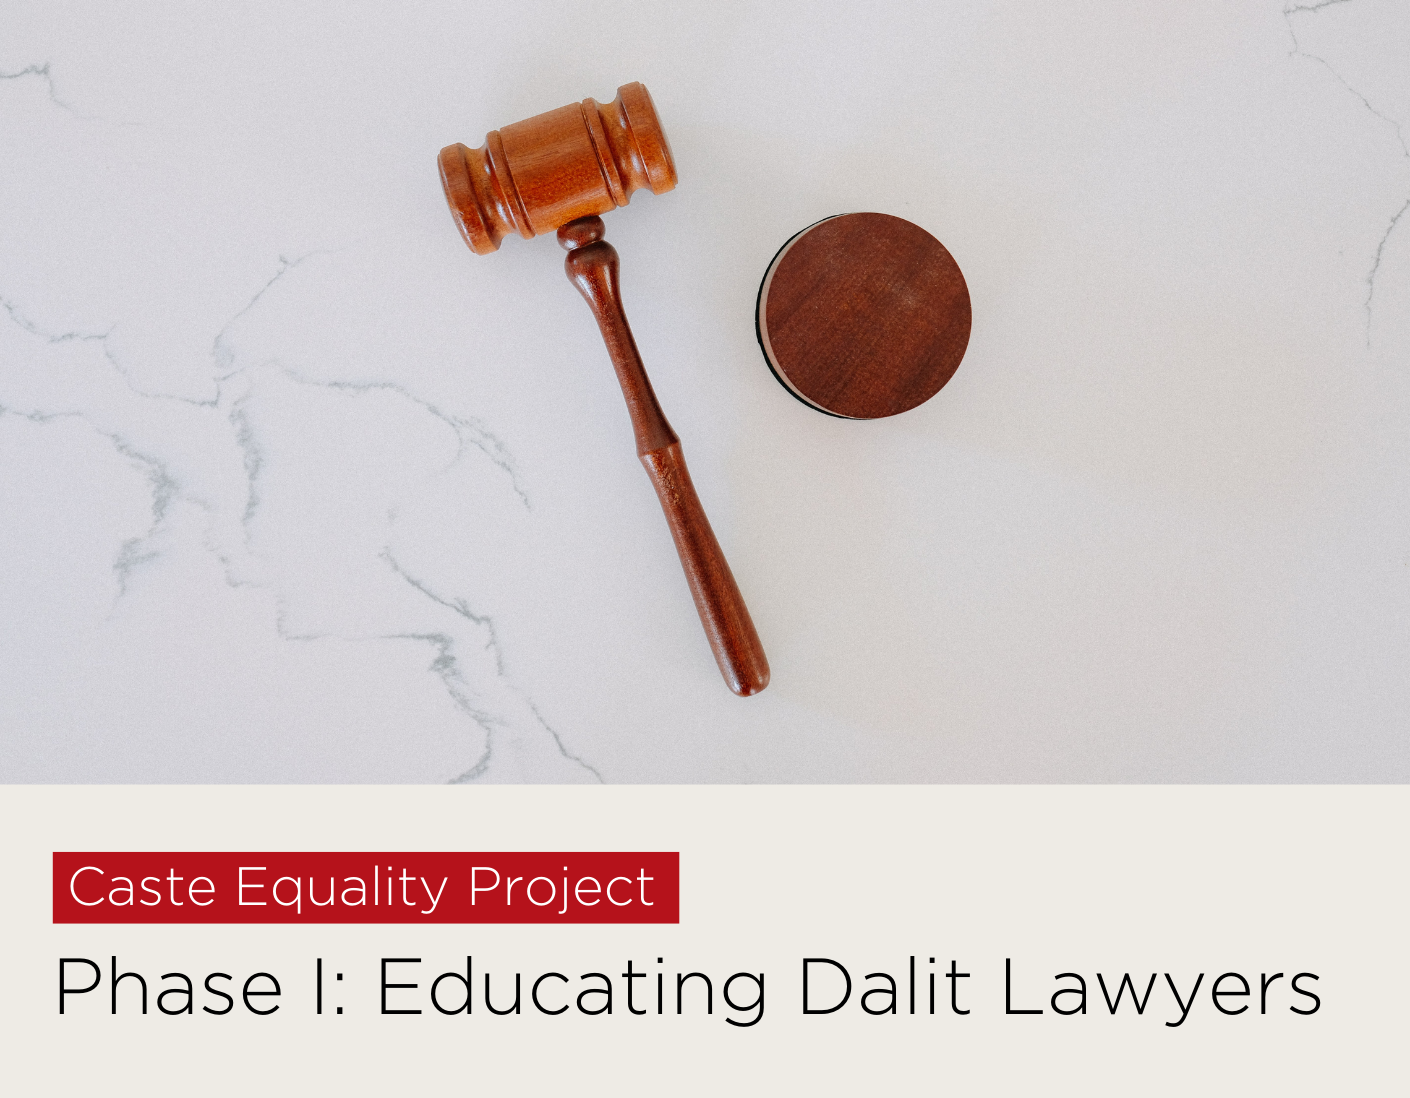 NYF Launches Phase I of Caste Equality Project: Educating Dalit Lawyers